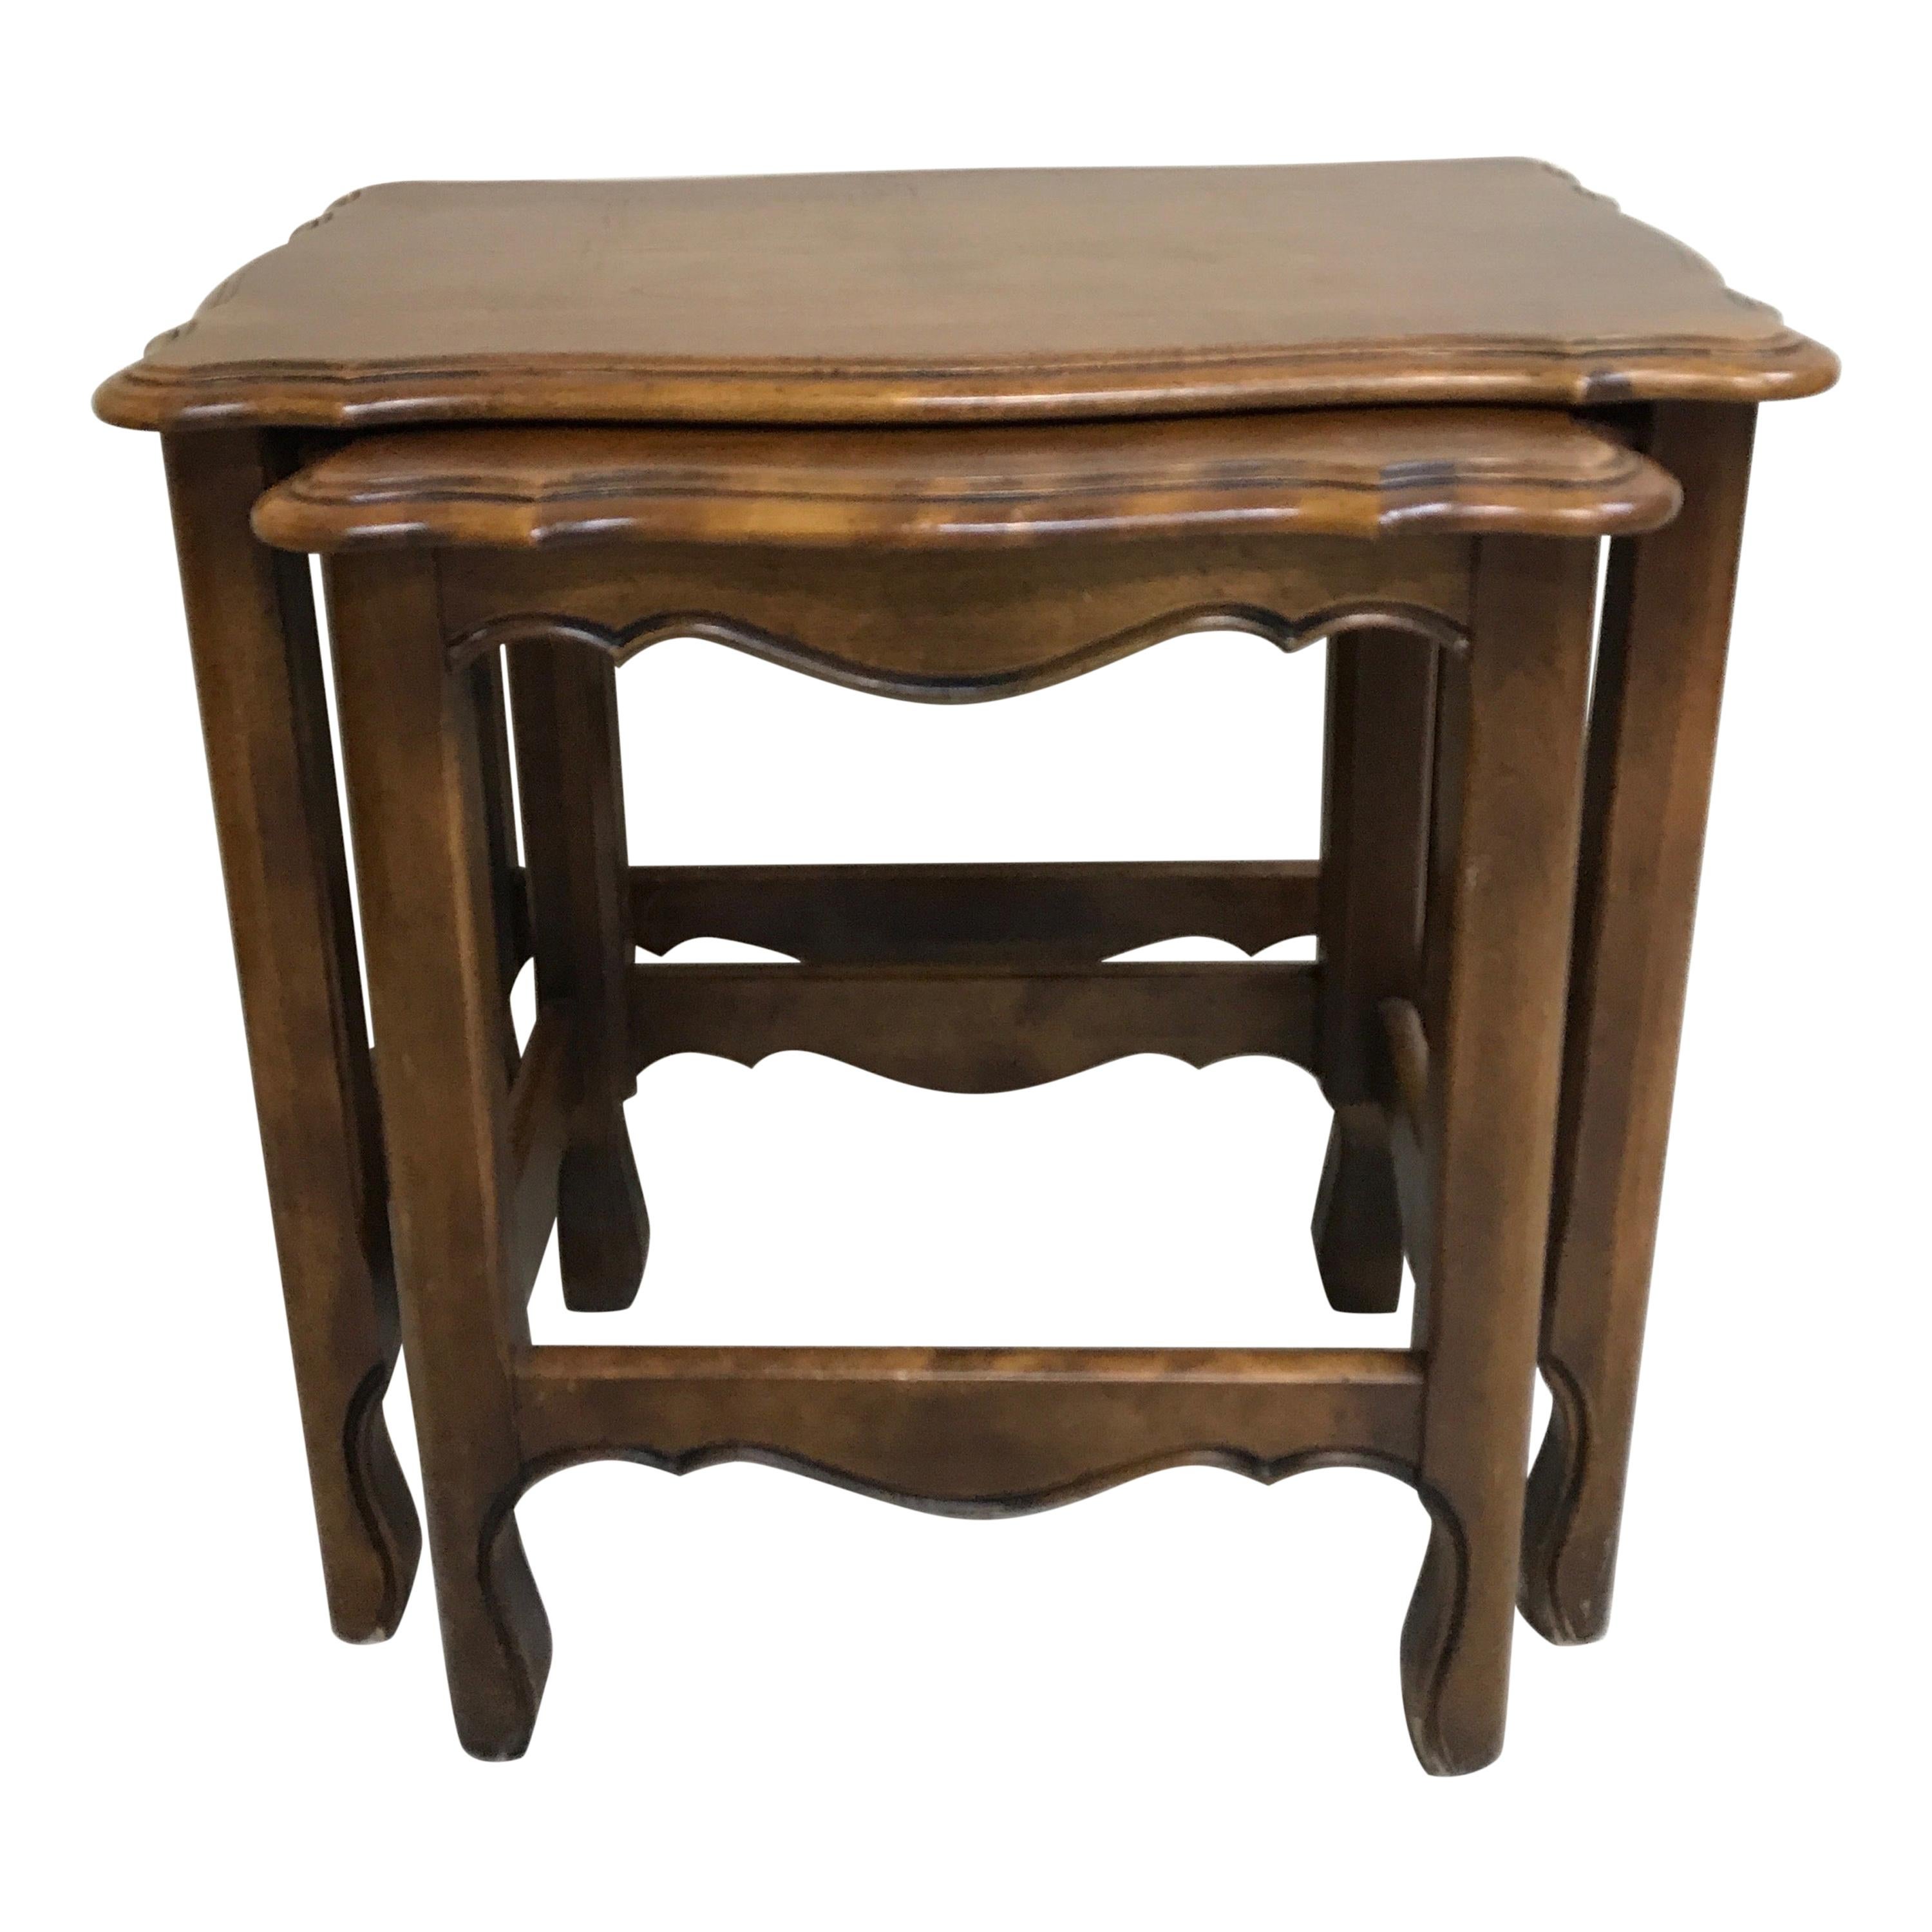 Country French Stacking Tables For Sale